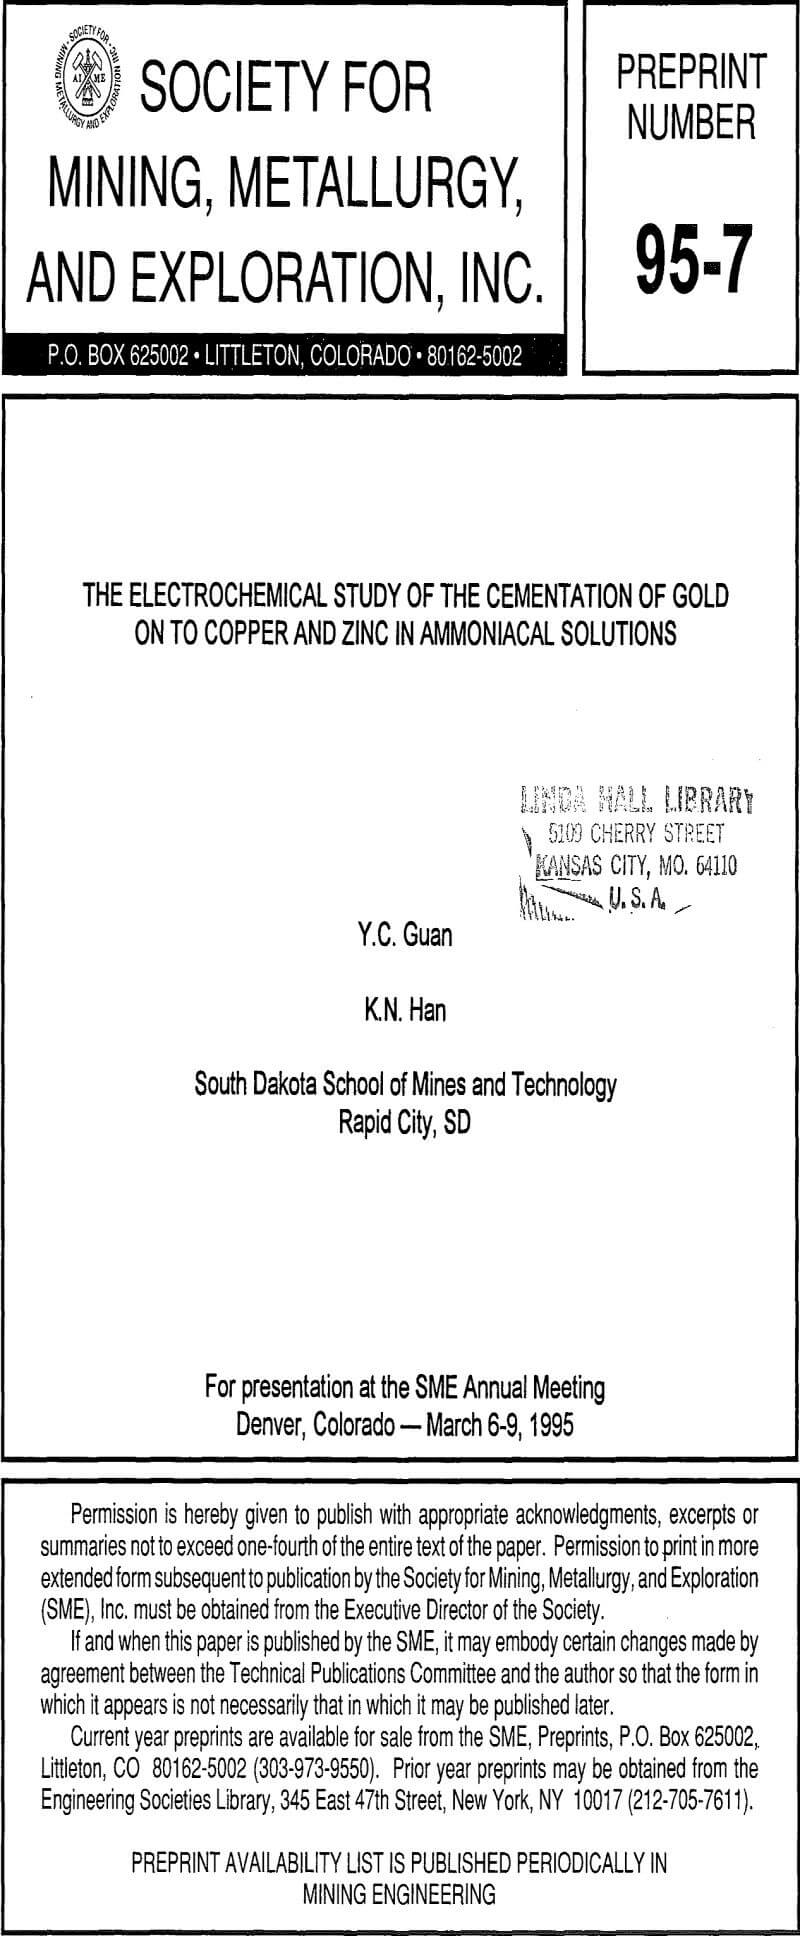 the electrochemical study of the cementation of gold on to copper and zinc in ammoniacal solutions